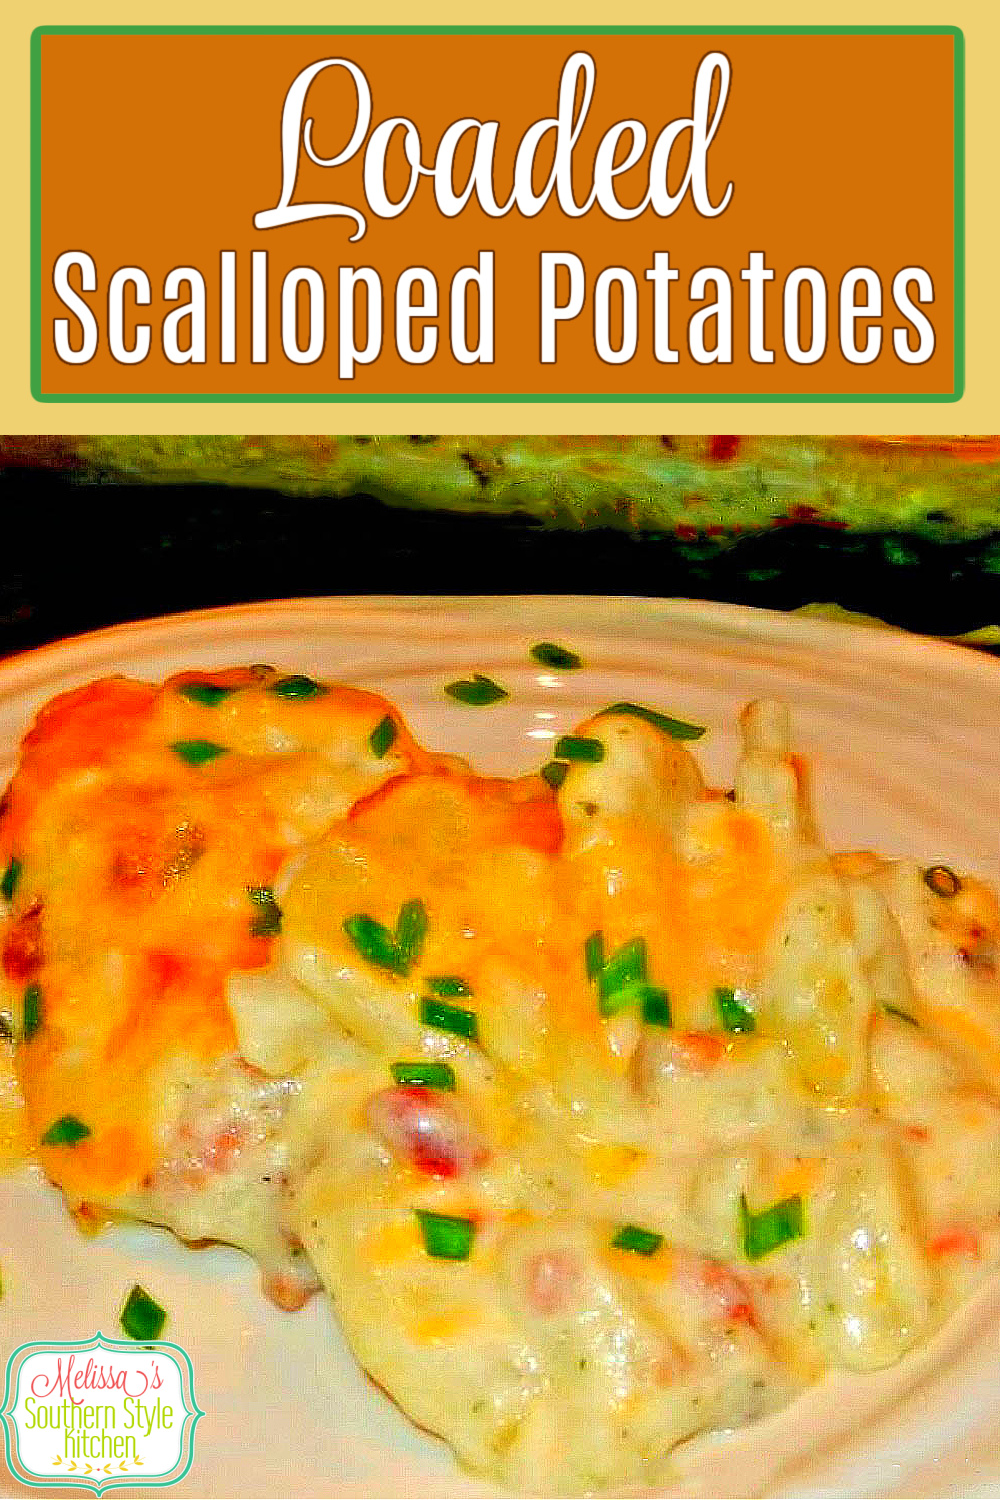 This side dish goes with a myriad of entrees and it's loaded with bacon, chives and plenty of gooey cheese! #loadedscallopedpotatoes #potatoecasserole #scallopedpotatoes #potatorecipes #sidedishrecipes #bacon #casseroles #dinner #dinnerrecipes #southernfood #southernrecipes via @melissasssk